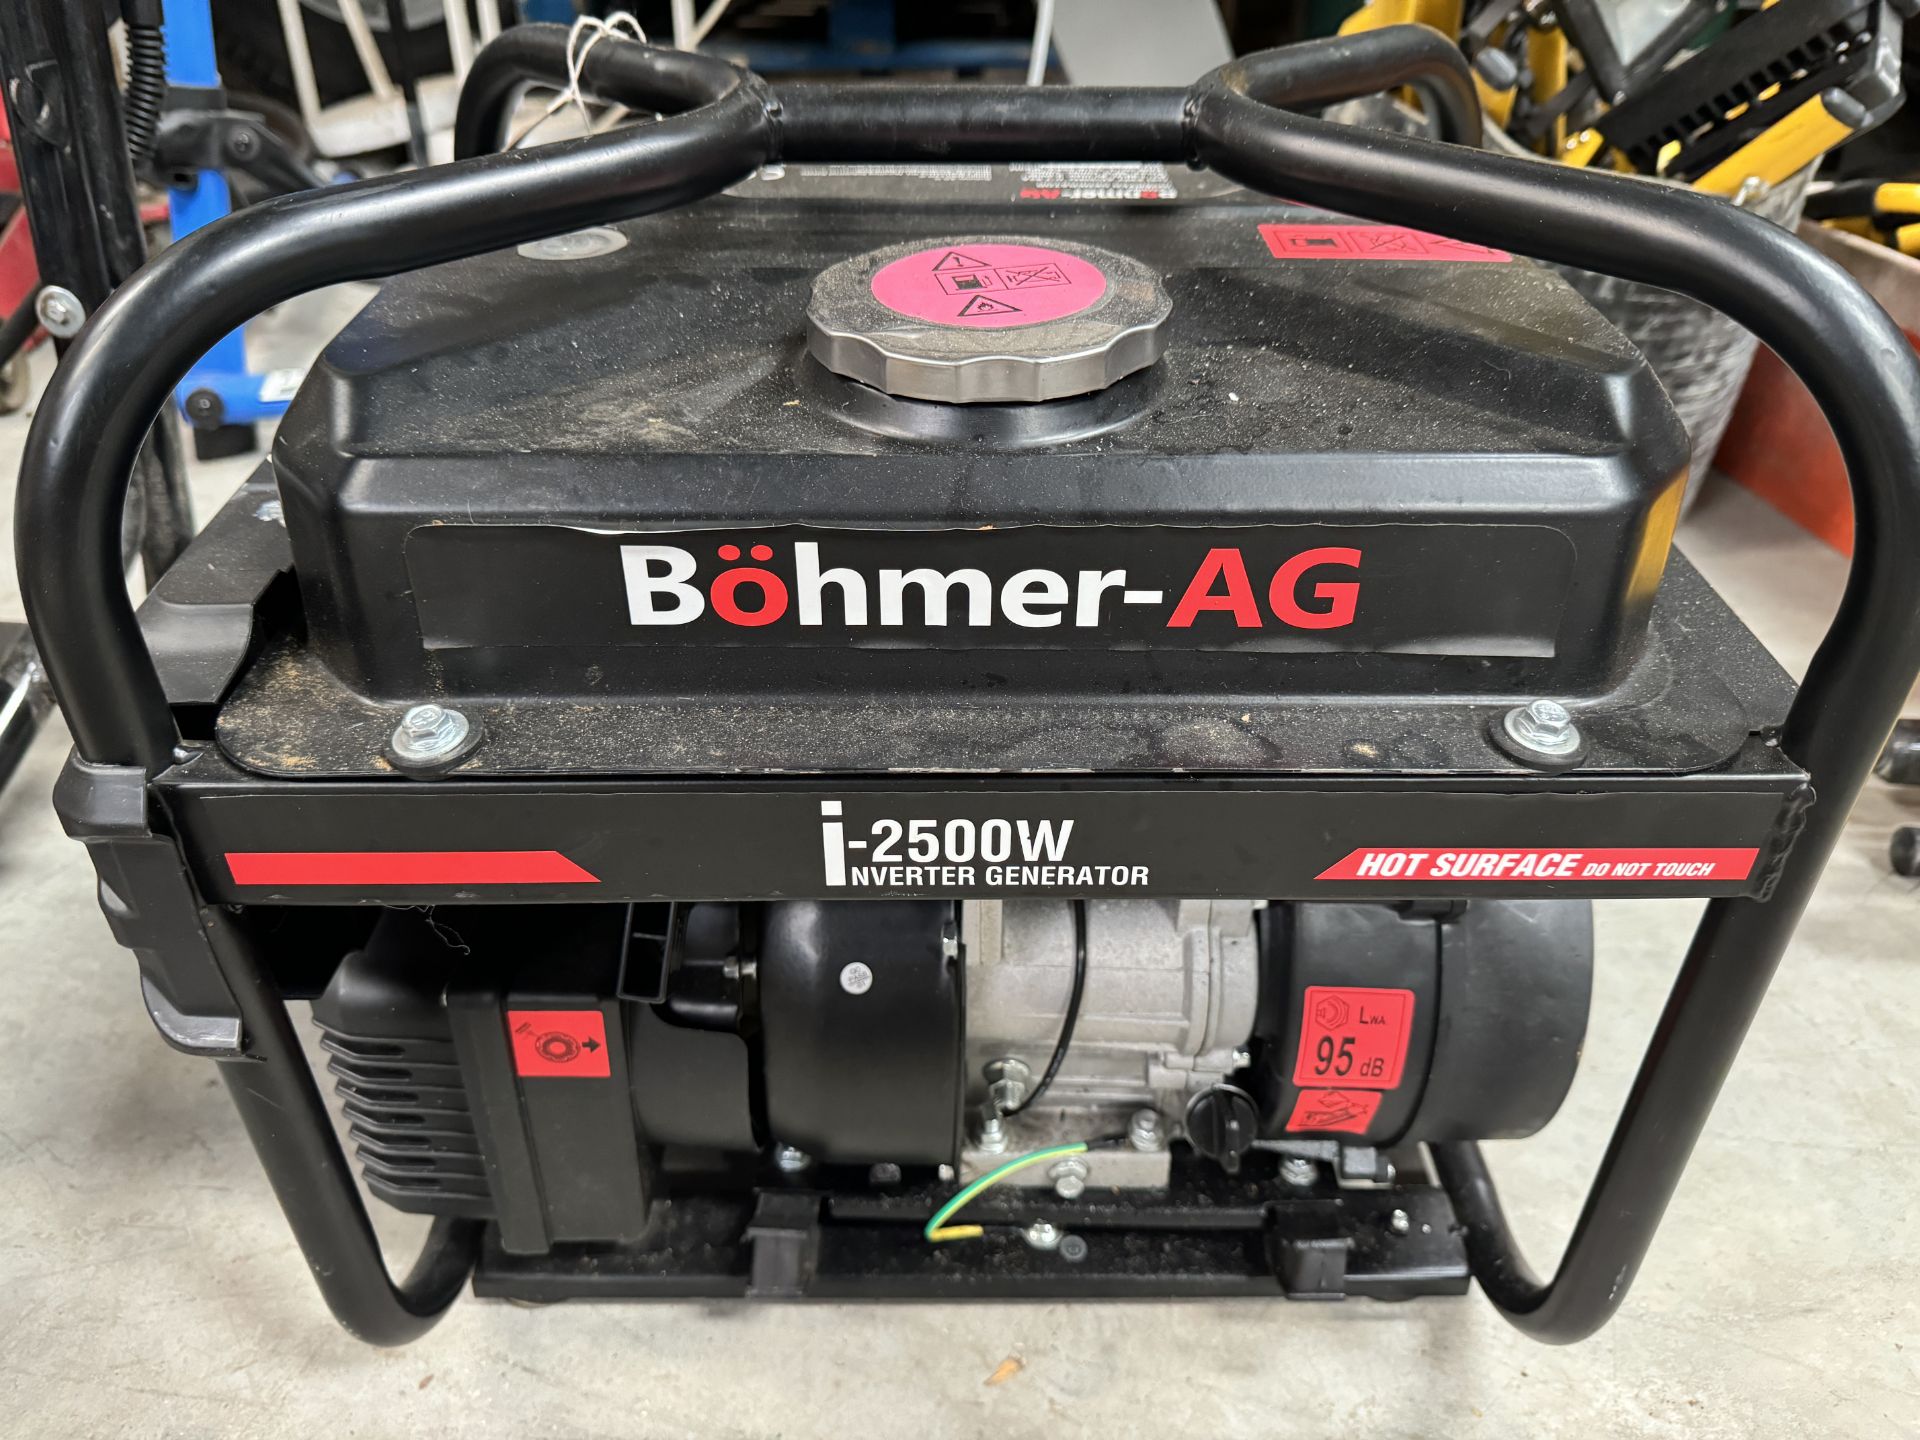 Bohmer AG i-2500w Inverter Generator (Location: Brentwood. Please Refer to General Notes)